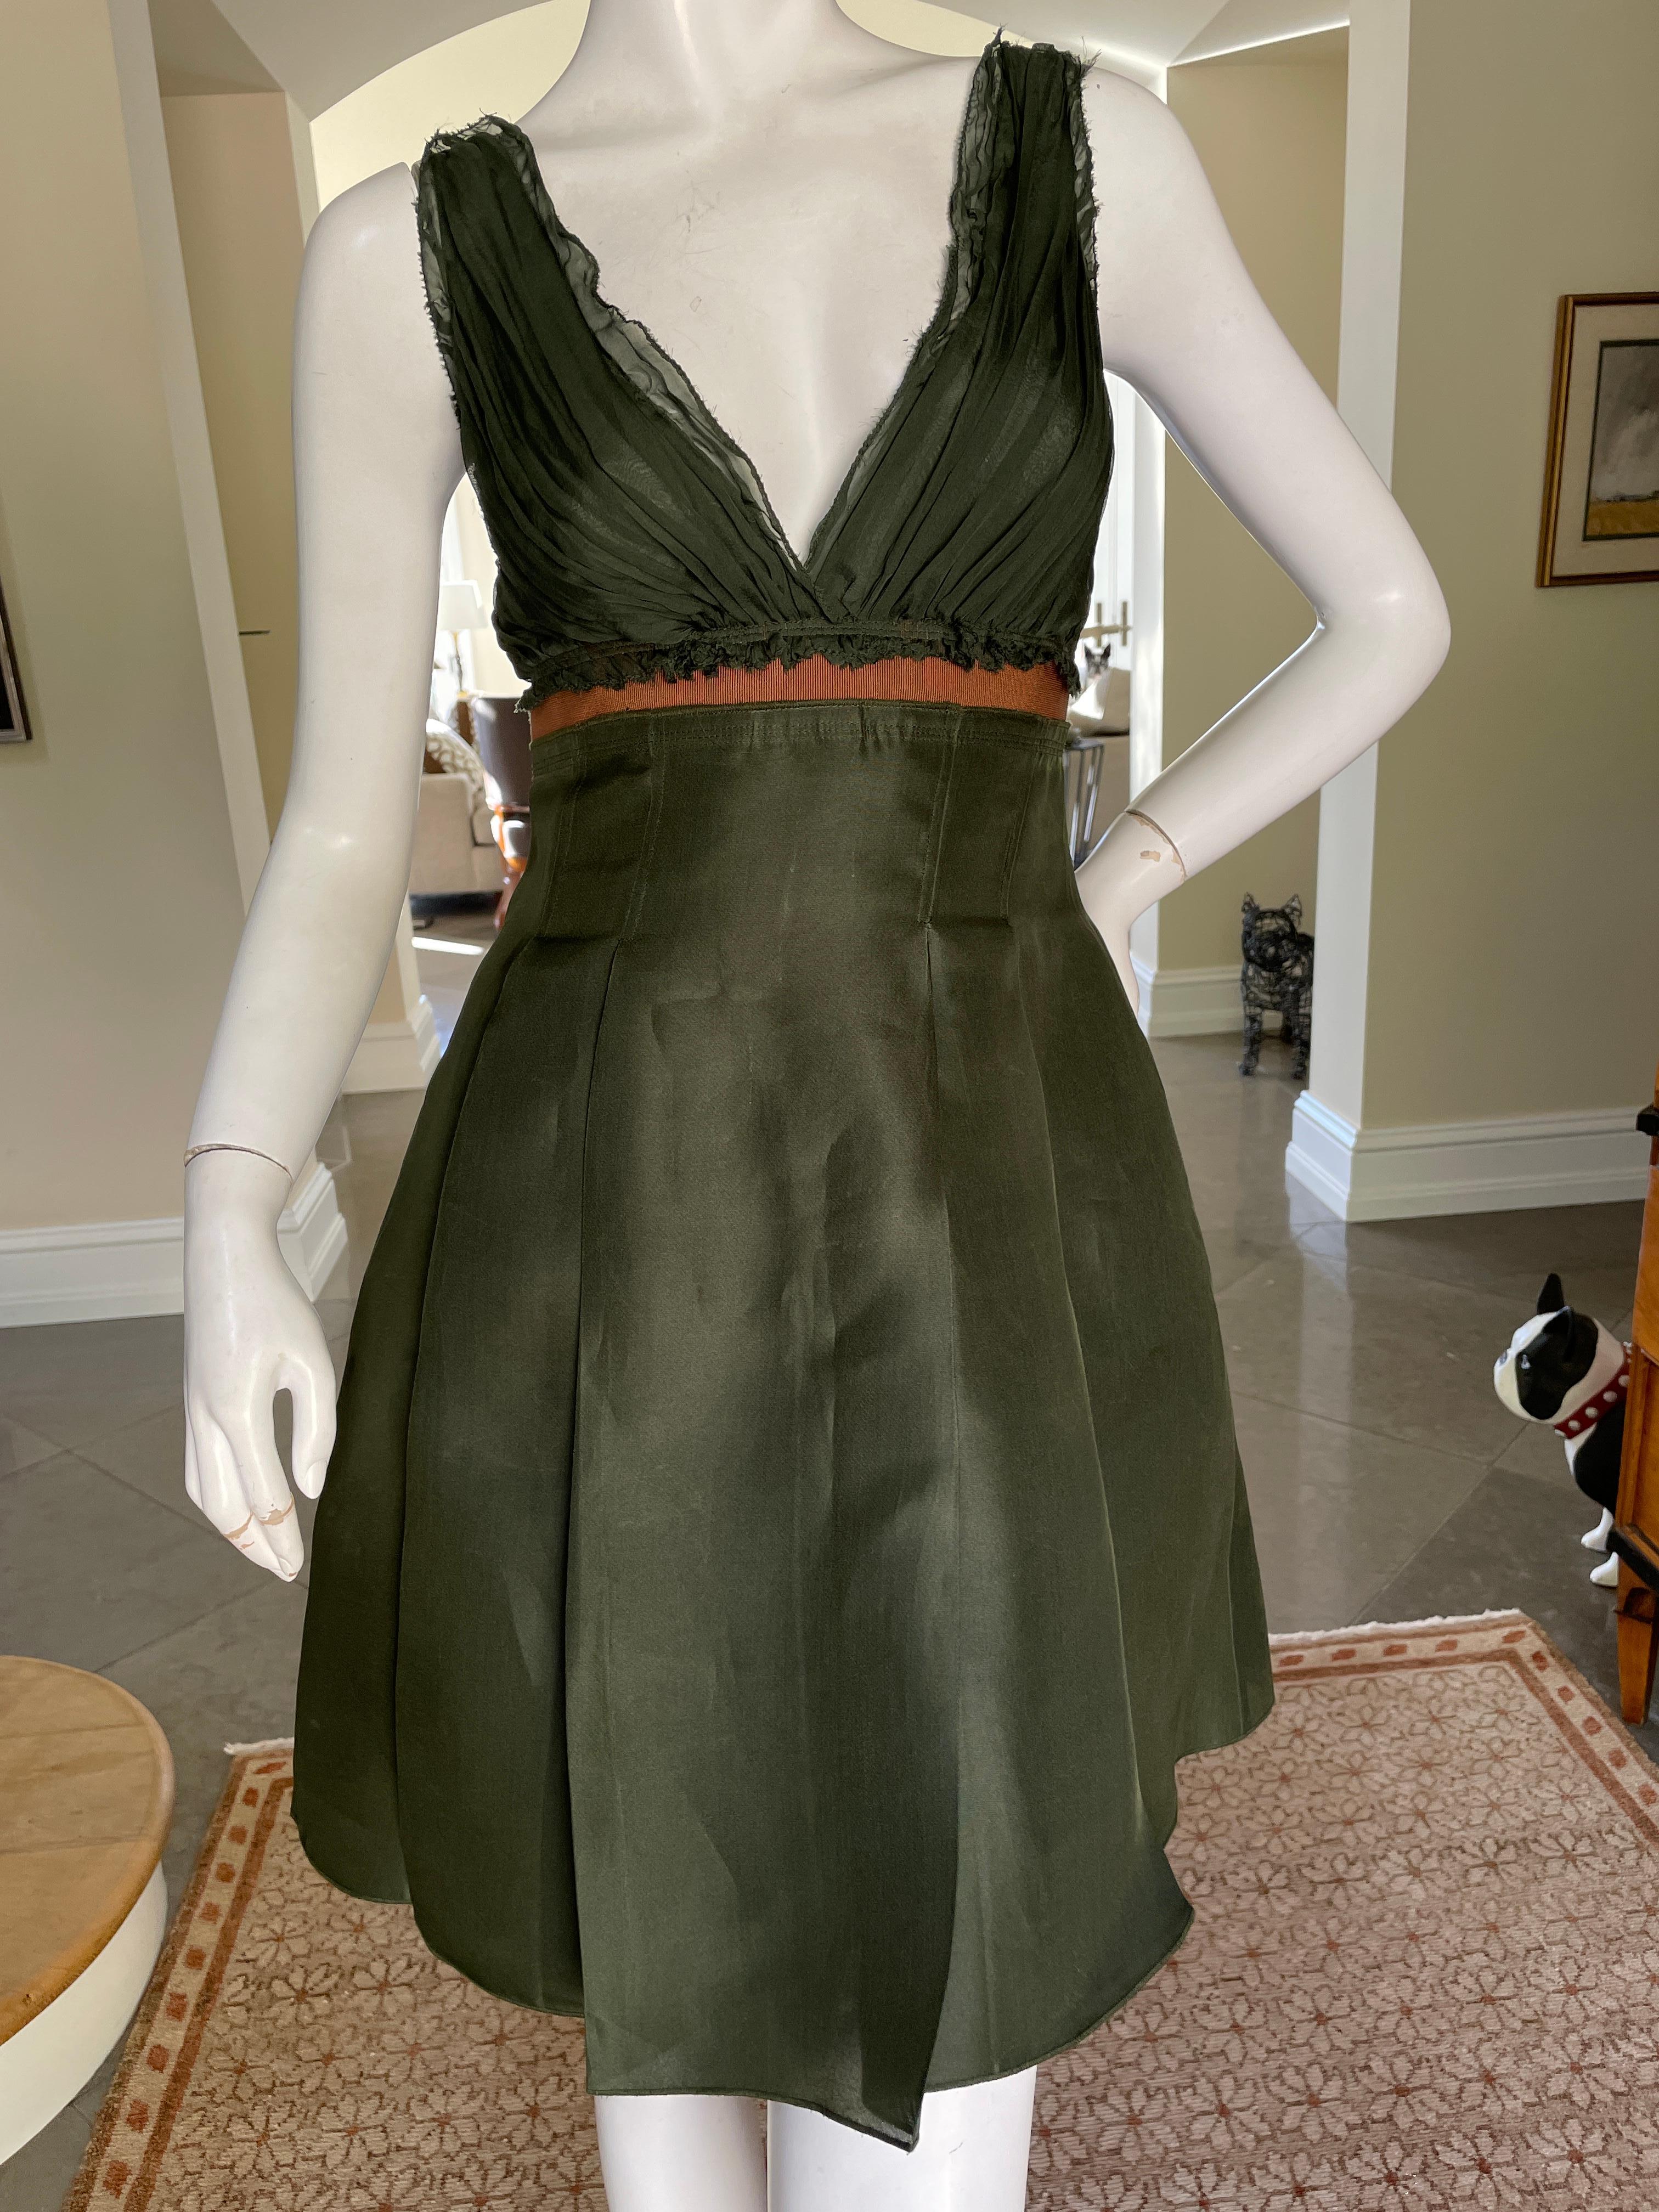 D&G by Dolce & Gabbana Vintage Green Silk Cocktail Dress.
Unworn, new without tags
 Size 40
 Bust 34